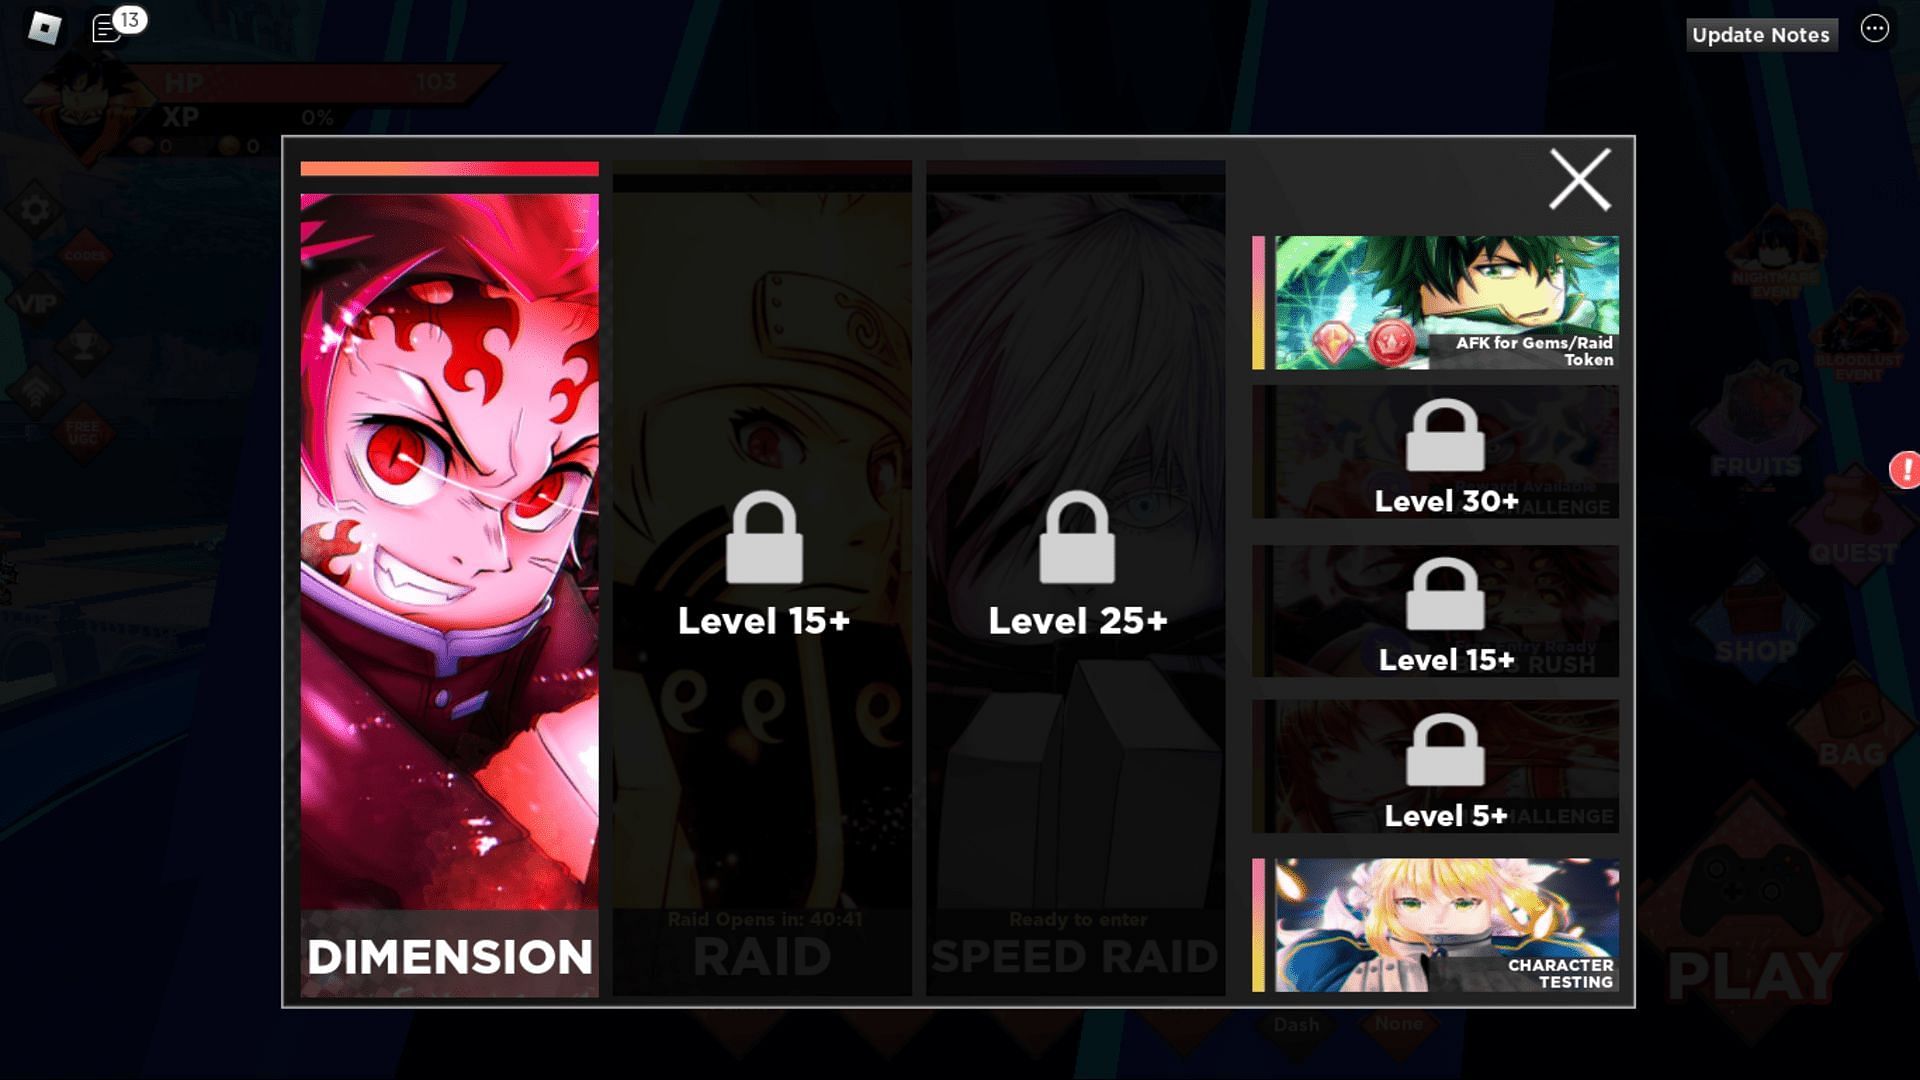 The mode selection window in Anime Dimensions SImulator (Image via Roblox)